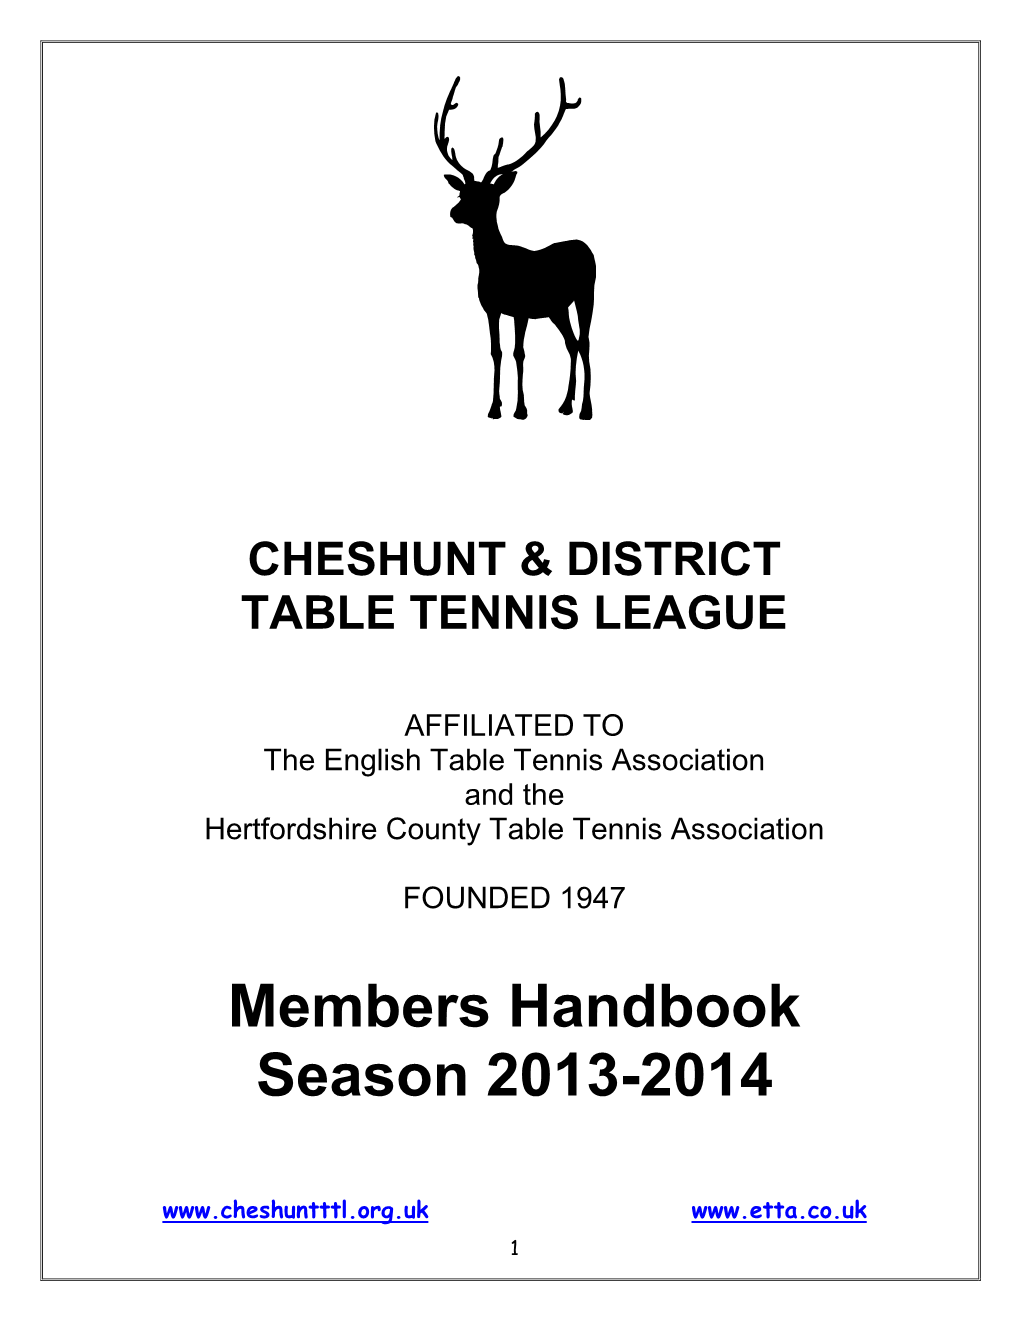 CHESHUNT and DISTRICT TABLE TENNIS LEAGUE Affiliated to the English Table Tennis Association and the Hertfordshire County Table Tennis Association